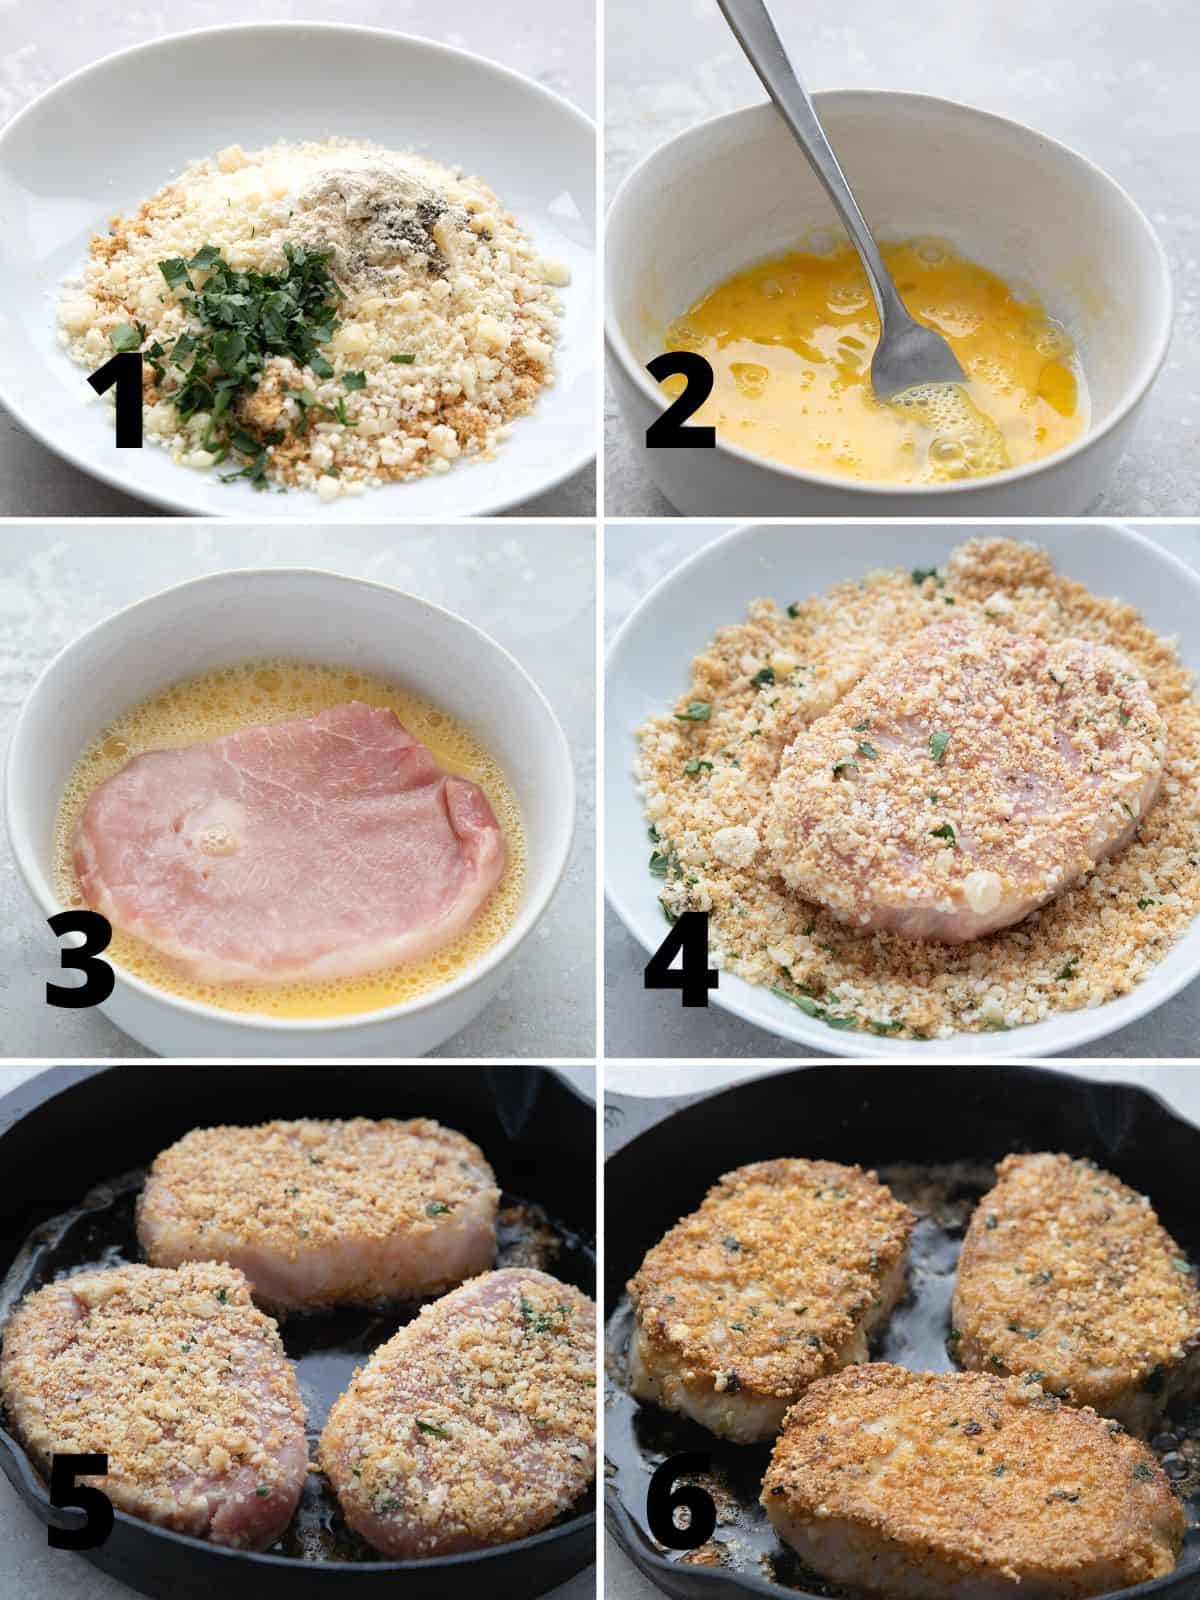 A collage of 6 images showing the steps for making Parmesan Crusted Pork Chops.